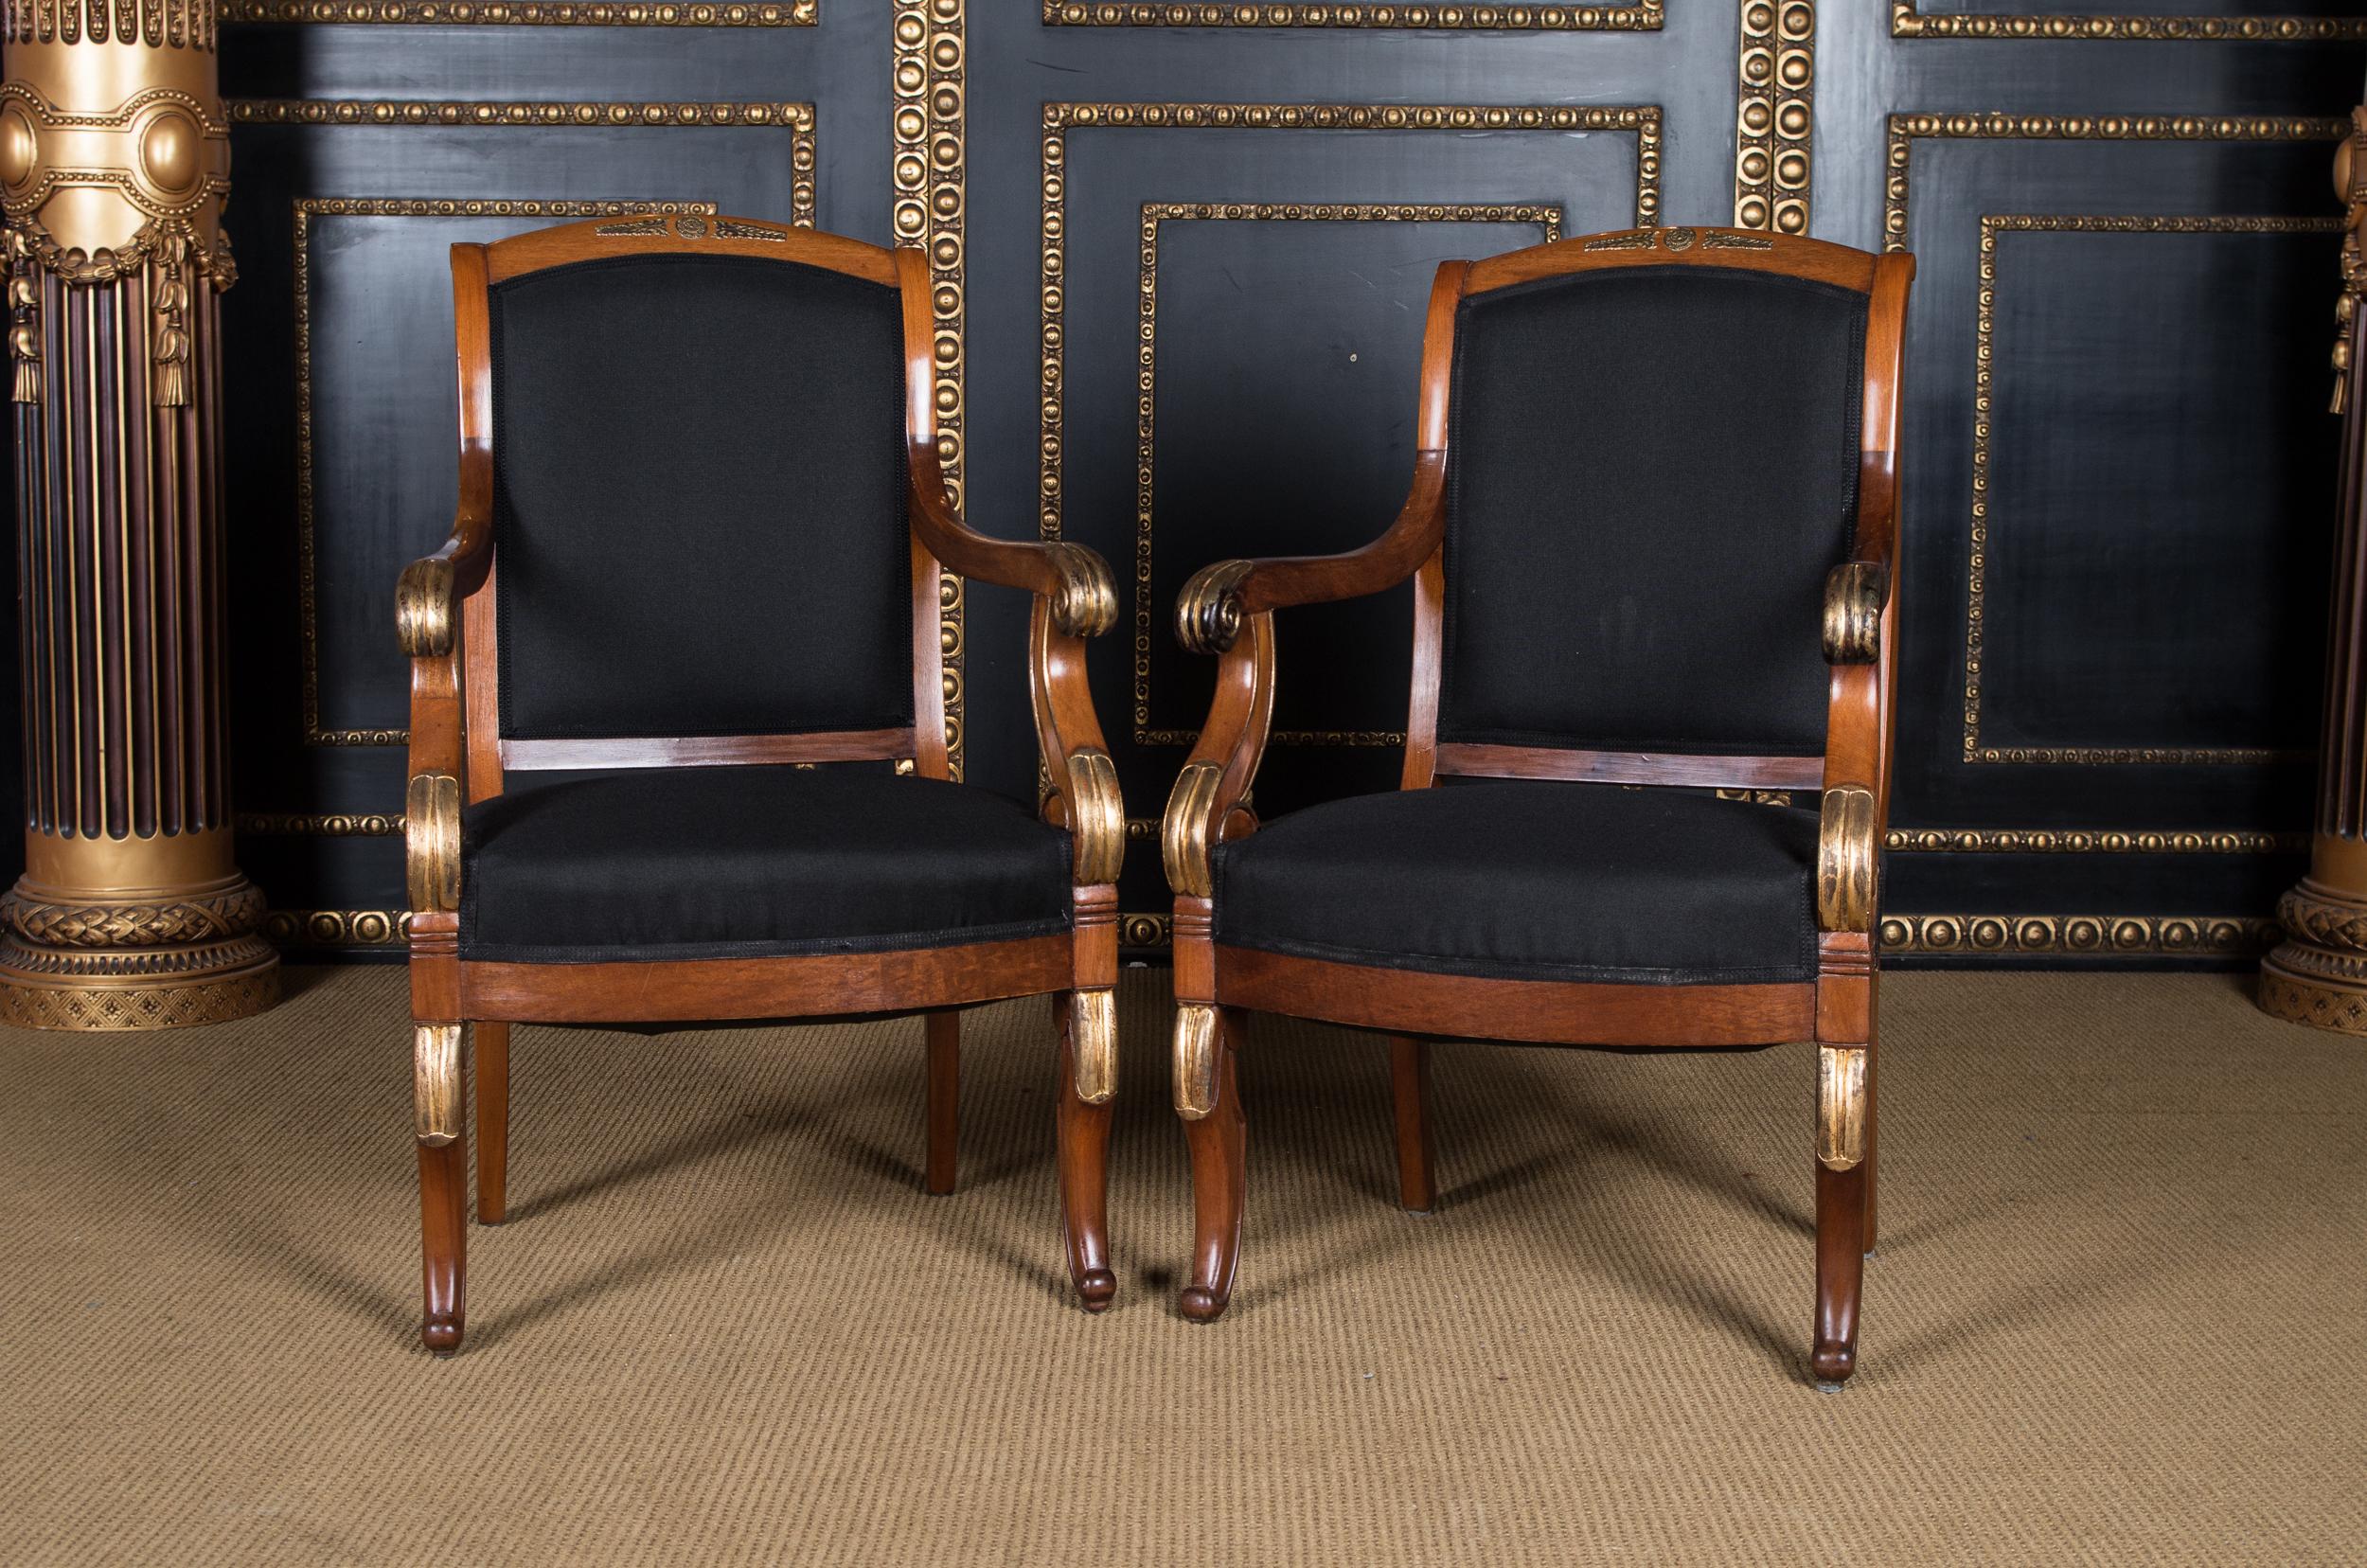 Two French Empire armchairs circa 1860 mahogany

Massive mahogany partly carved. Curved frame on curly legs. Curved supports for slightly rising armrests ending in curled volute. High rectangular, slightly curved backrest frame with wide end. The